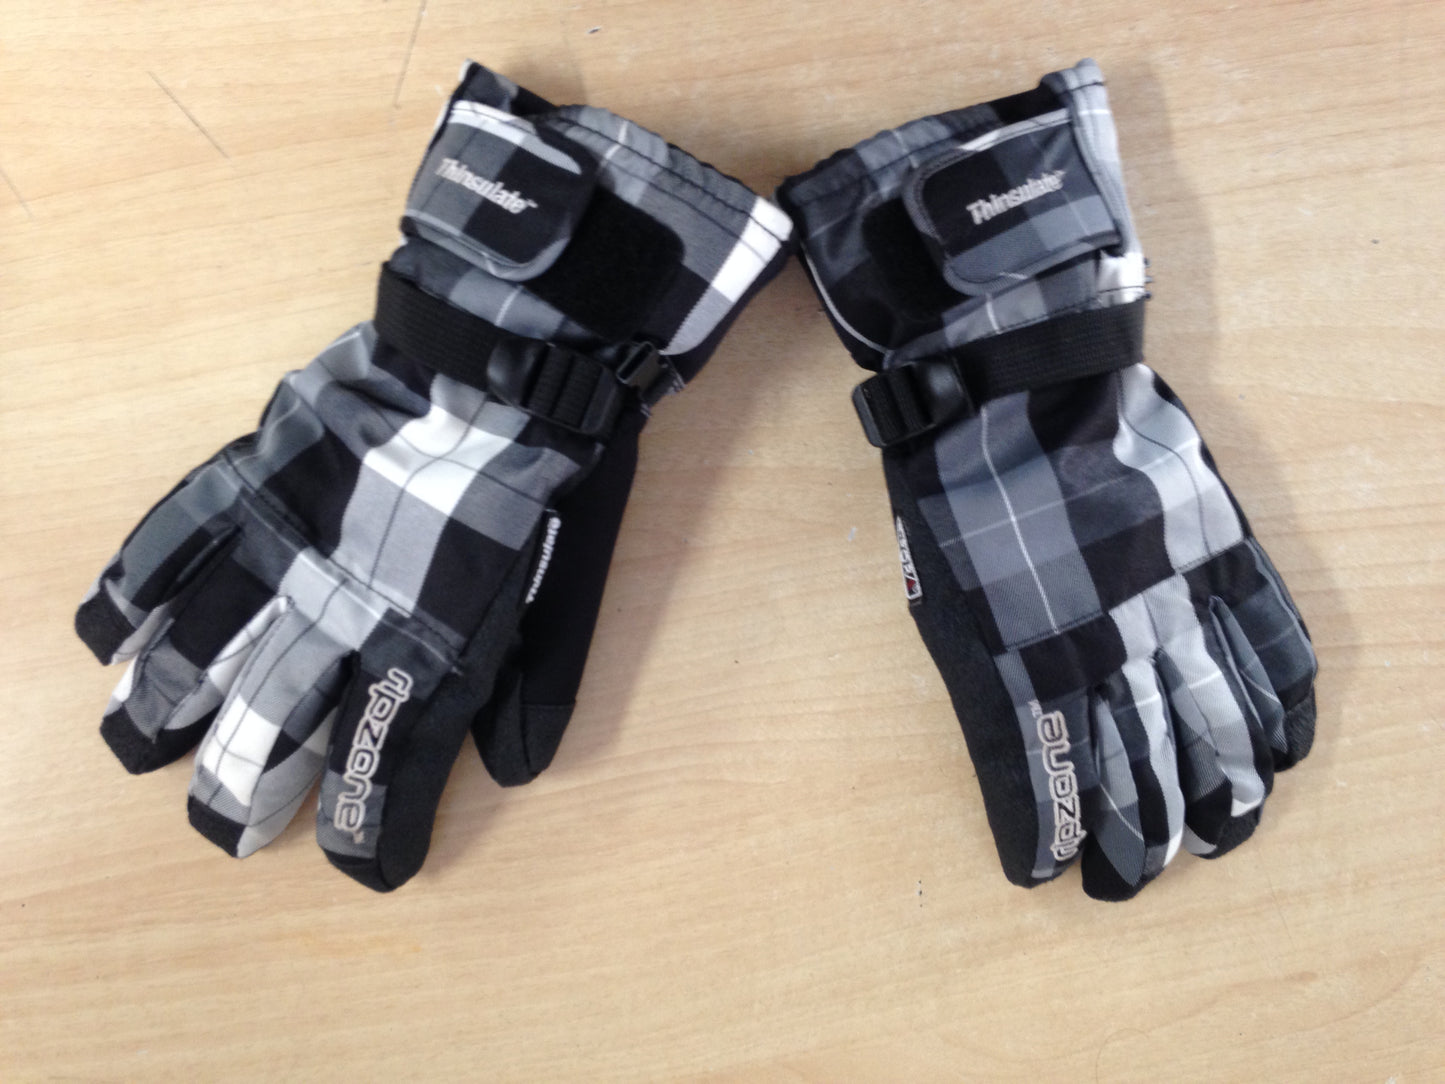 Winter Gloves and Mitts Men's Size Medium Ripzone Black Grey Snowboarding Excellent